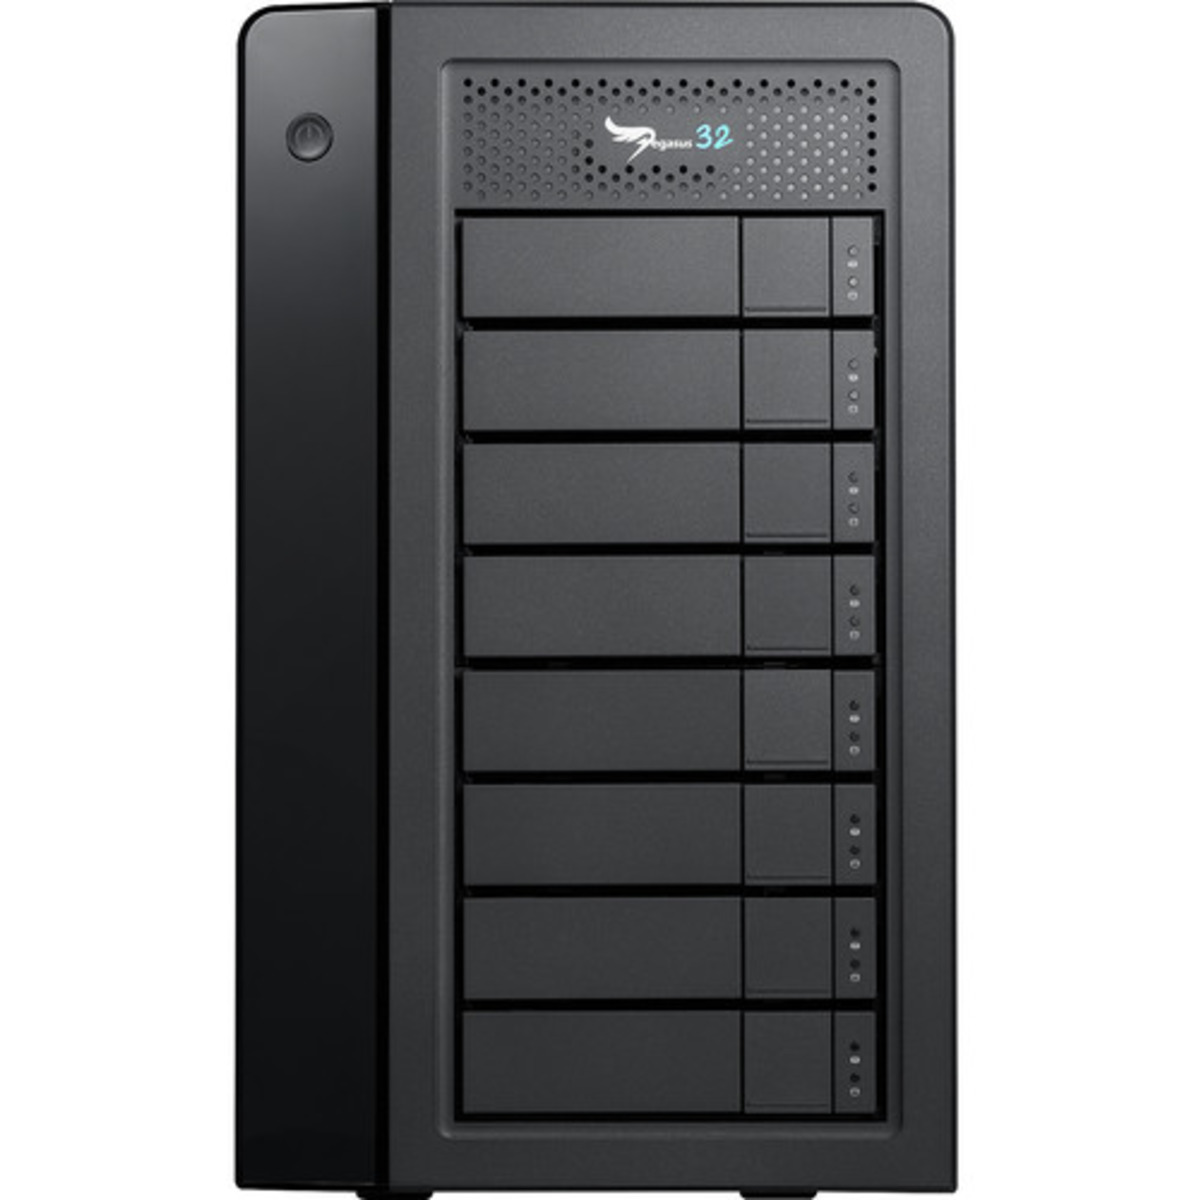 Promise Technology Pegasus32 R8 Thunderbolt 3 32tb 8-Bay Desktop Multimedia / Power User / Business DAS - Direct Attached Storage Device 8x4tb Crucial MX500 CT4000MX500SSD1 2.5 560/510MB/s SATA 6Gb/s SSD CONSUMER Class Drives Installed - Burn-In Tested - ON SALE Pegasus32 R8 Thunderbolt 3